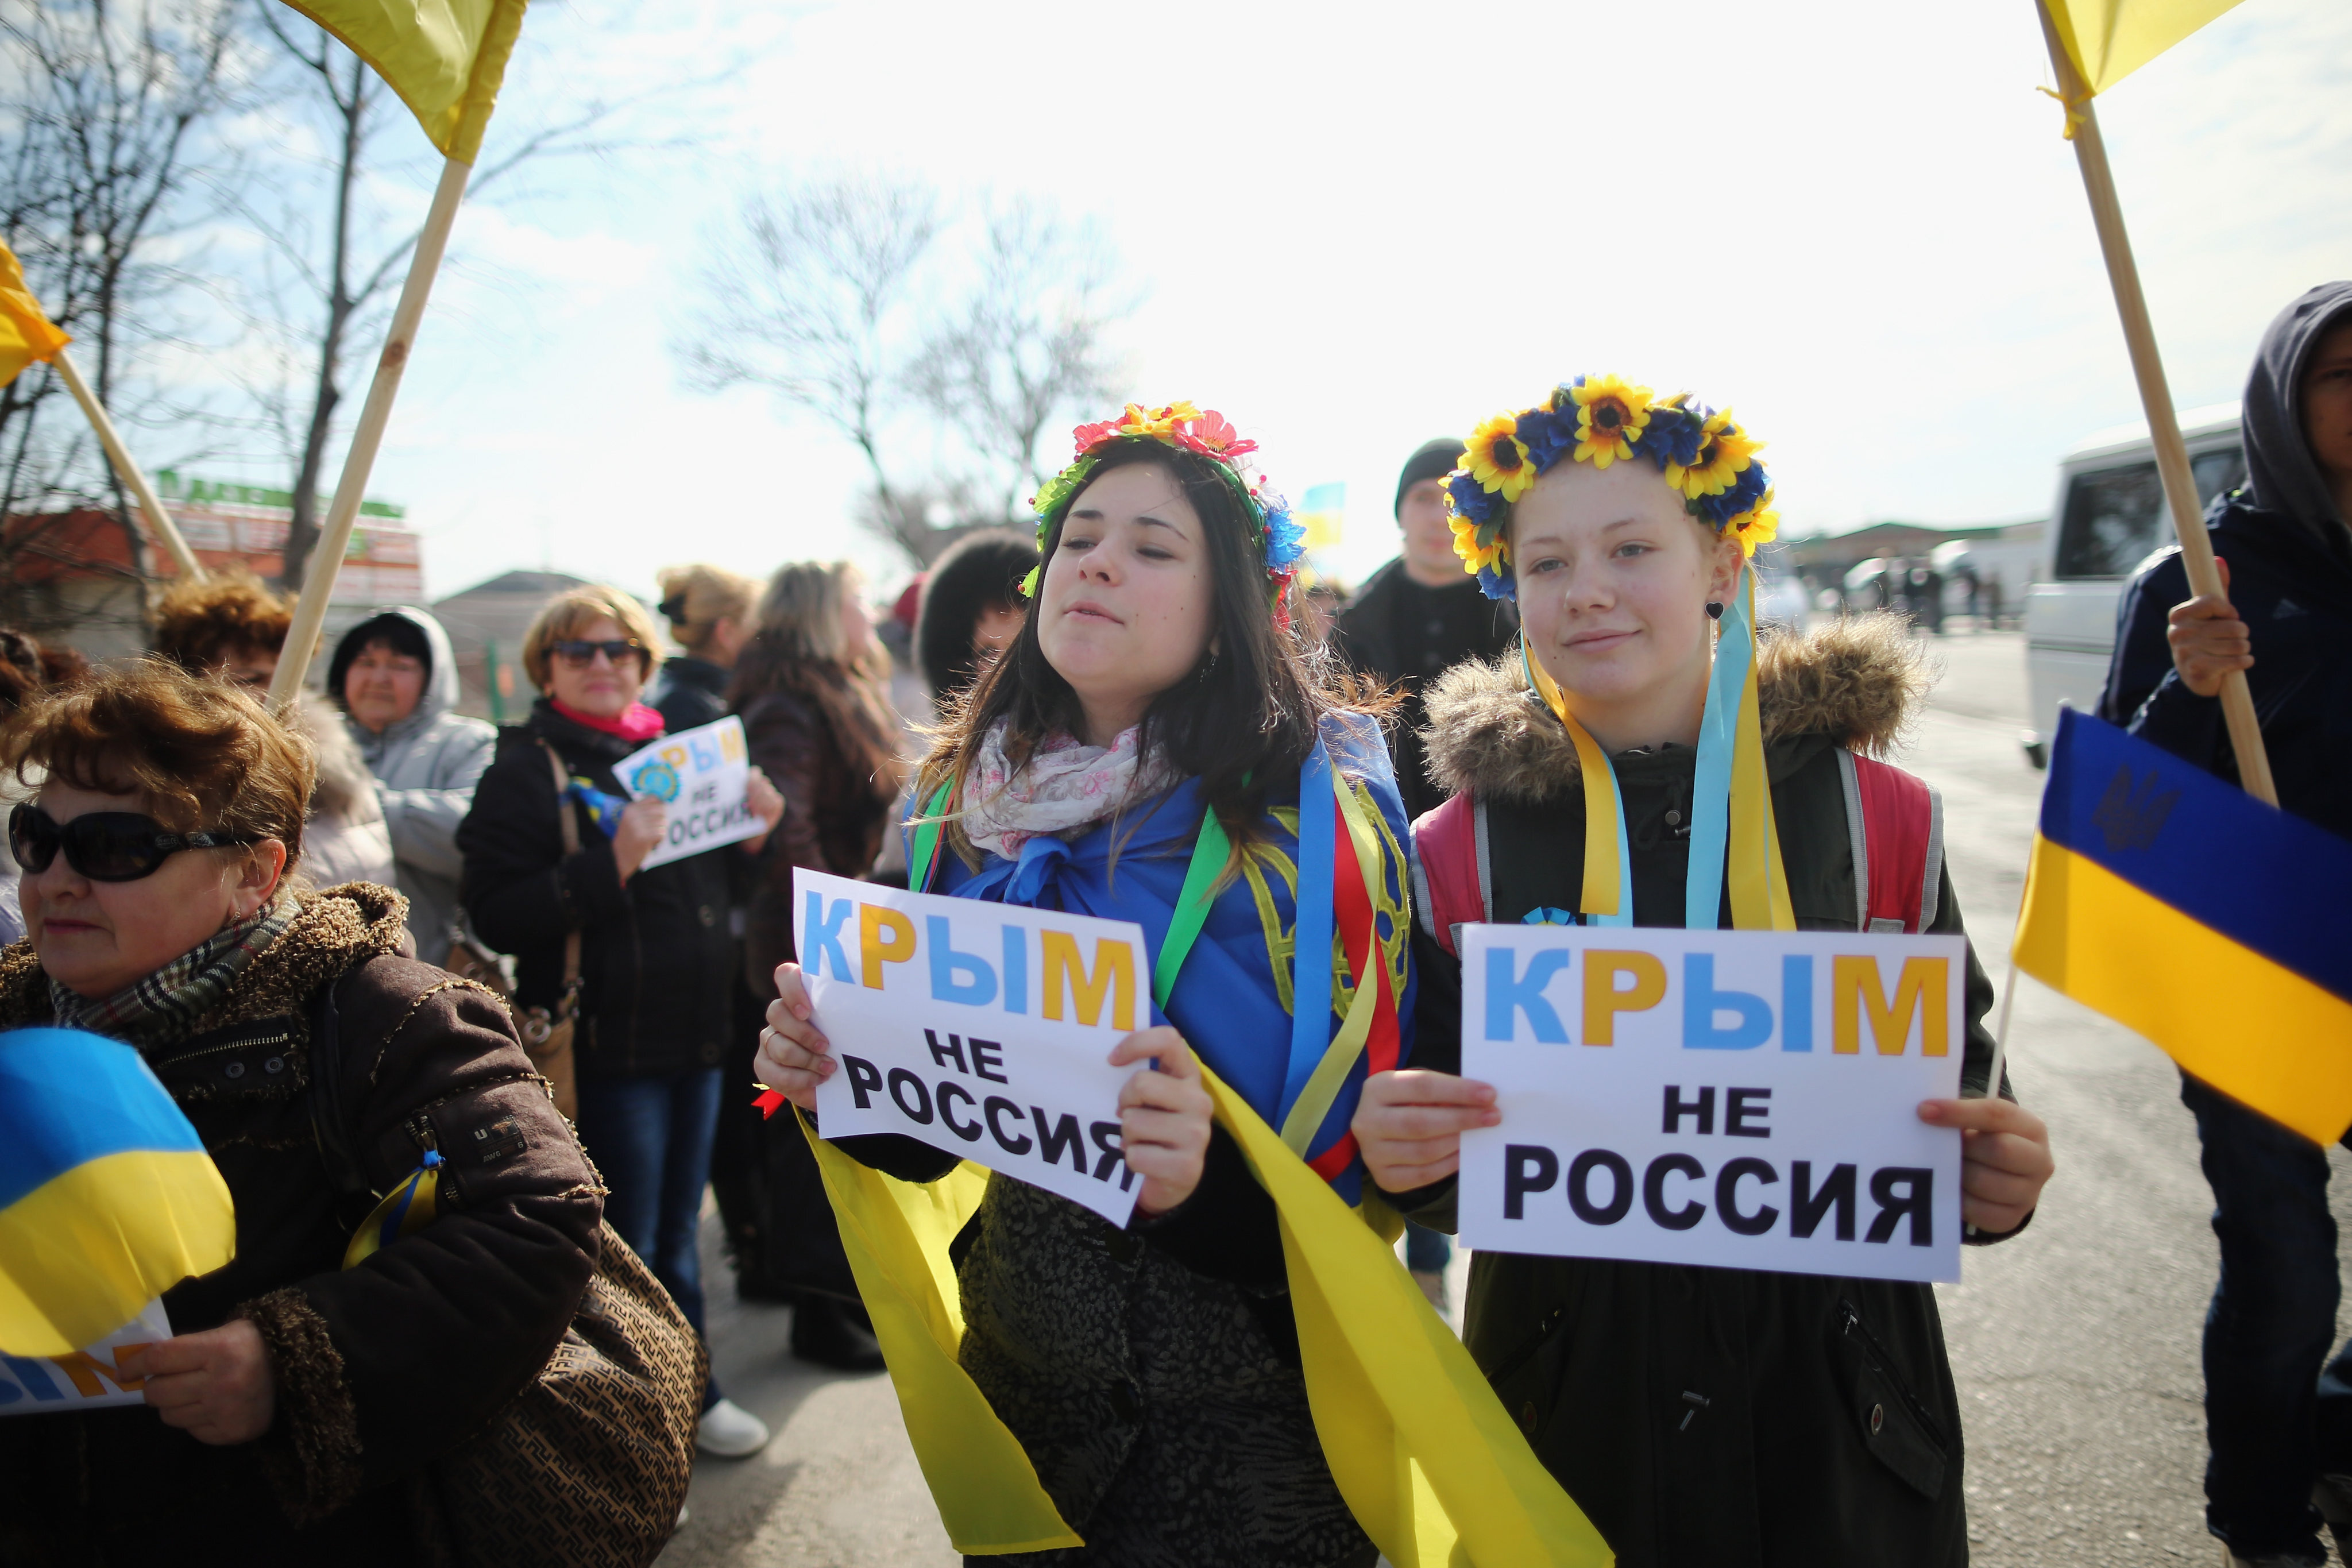 Two young Ukrainian women hold signs that read “Ukraine not Russia” in Crimea in 2014 after the territory’s annexation by Russian forces. Photo: Getty Images